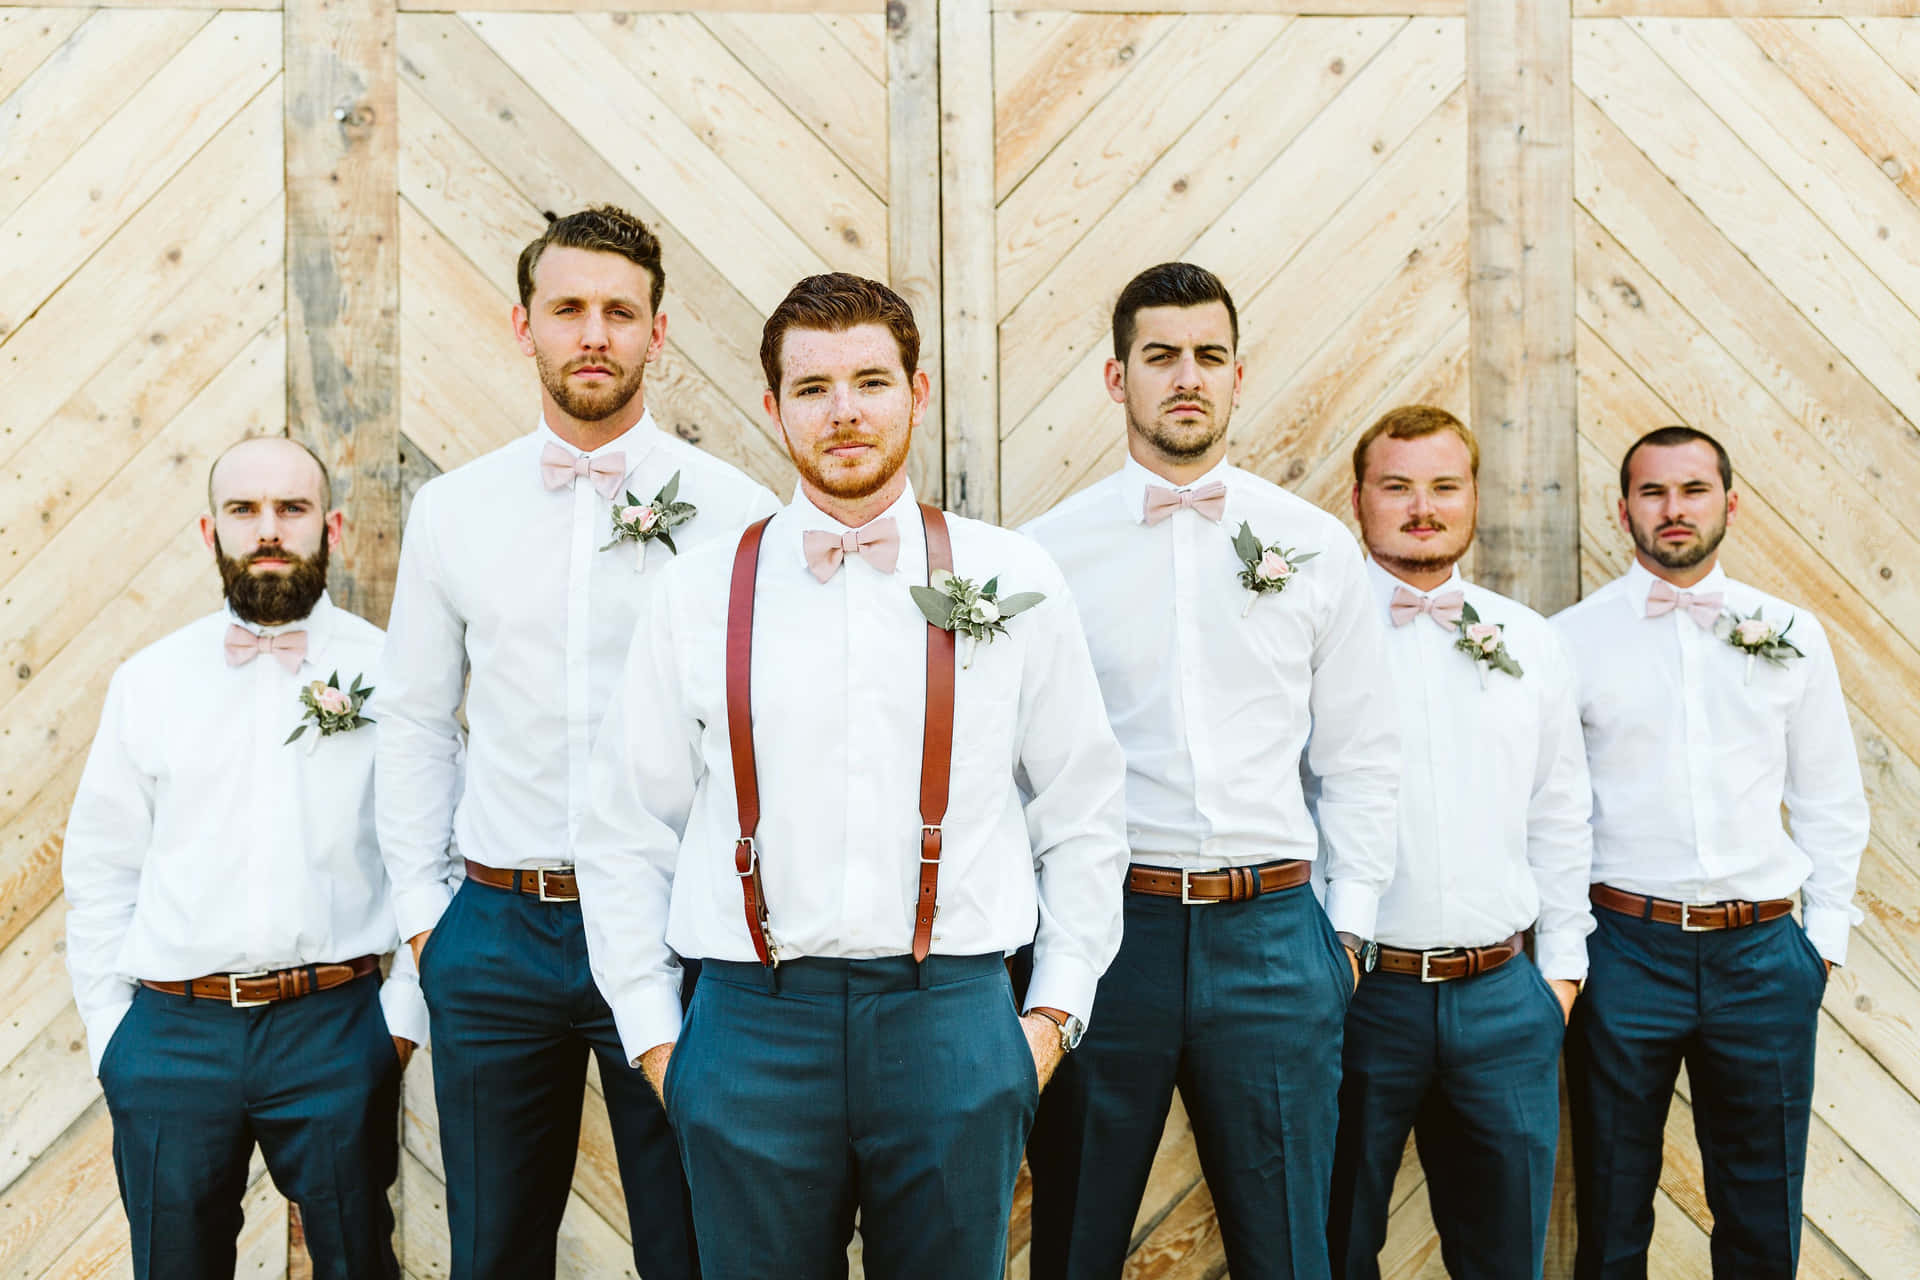 Groom surrounded by his groomsmen at a wedding